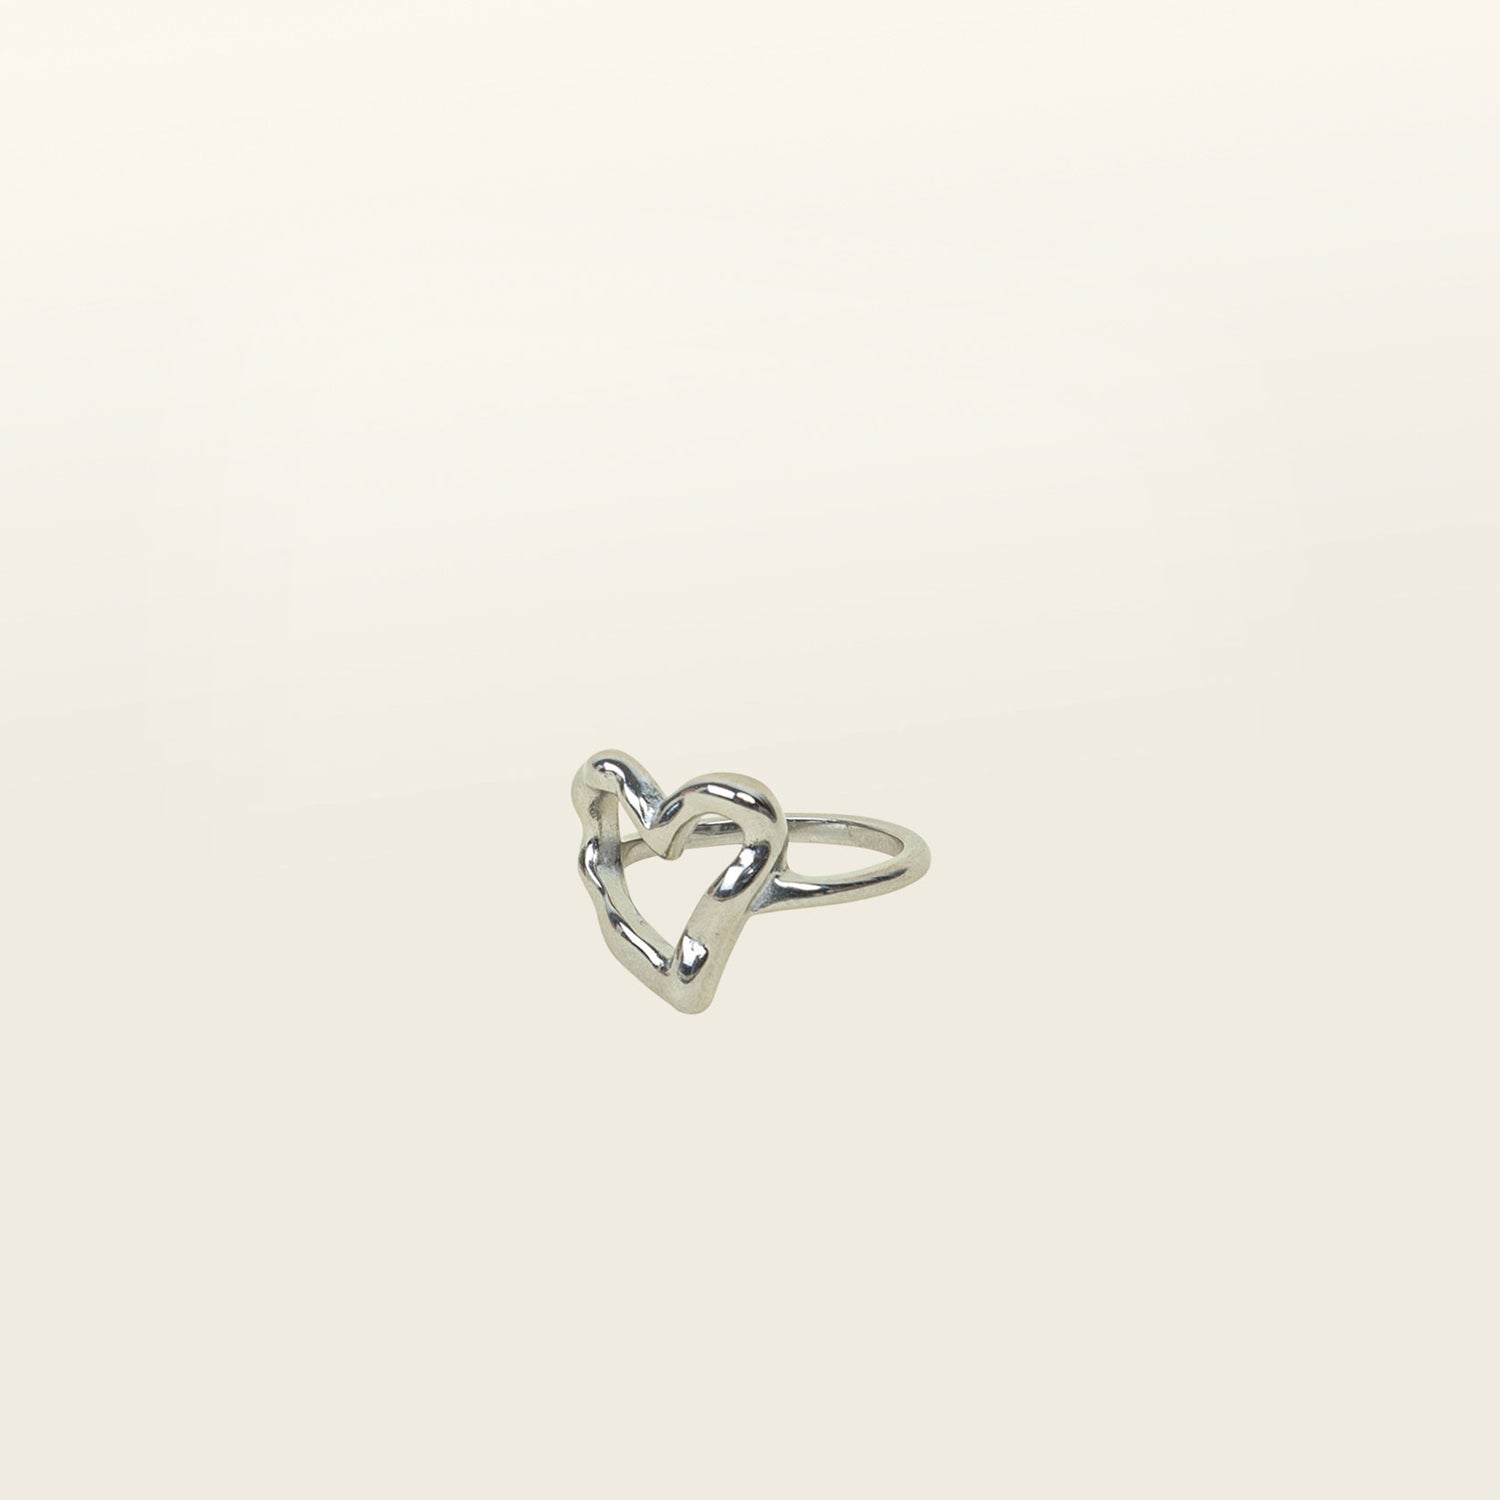 Image of the Ai Heart Ring in Silver is crafted with of 14K Gold Plated Stainless Steel, ensuring a durable and non-tarnishing construction. This piece is also water resistant and made without Lead, Nickel, or Cadmium for added safety. This is a single ring, with no ability to adjust.